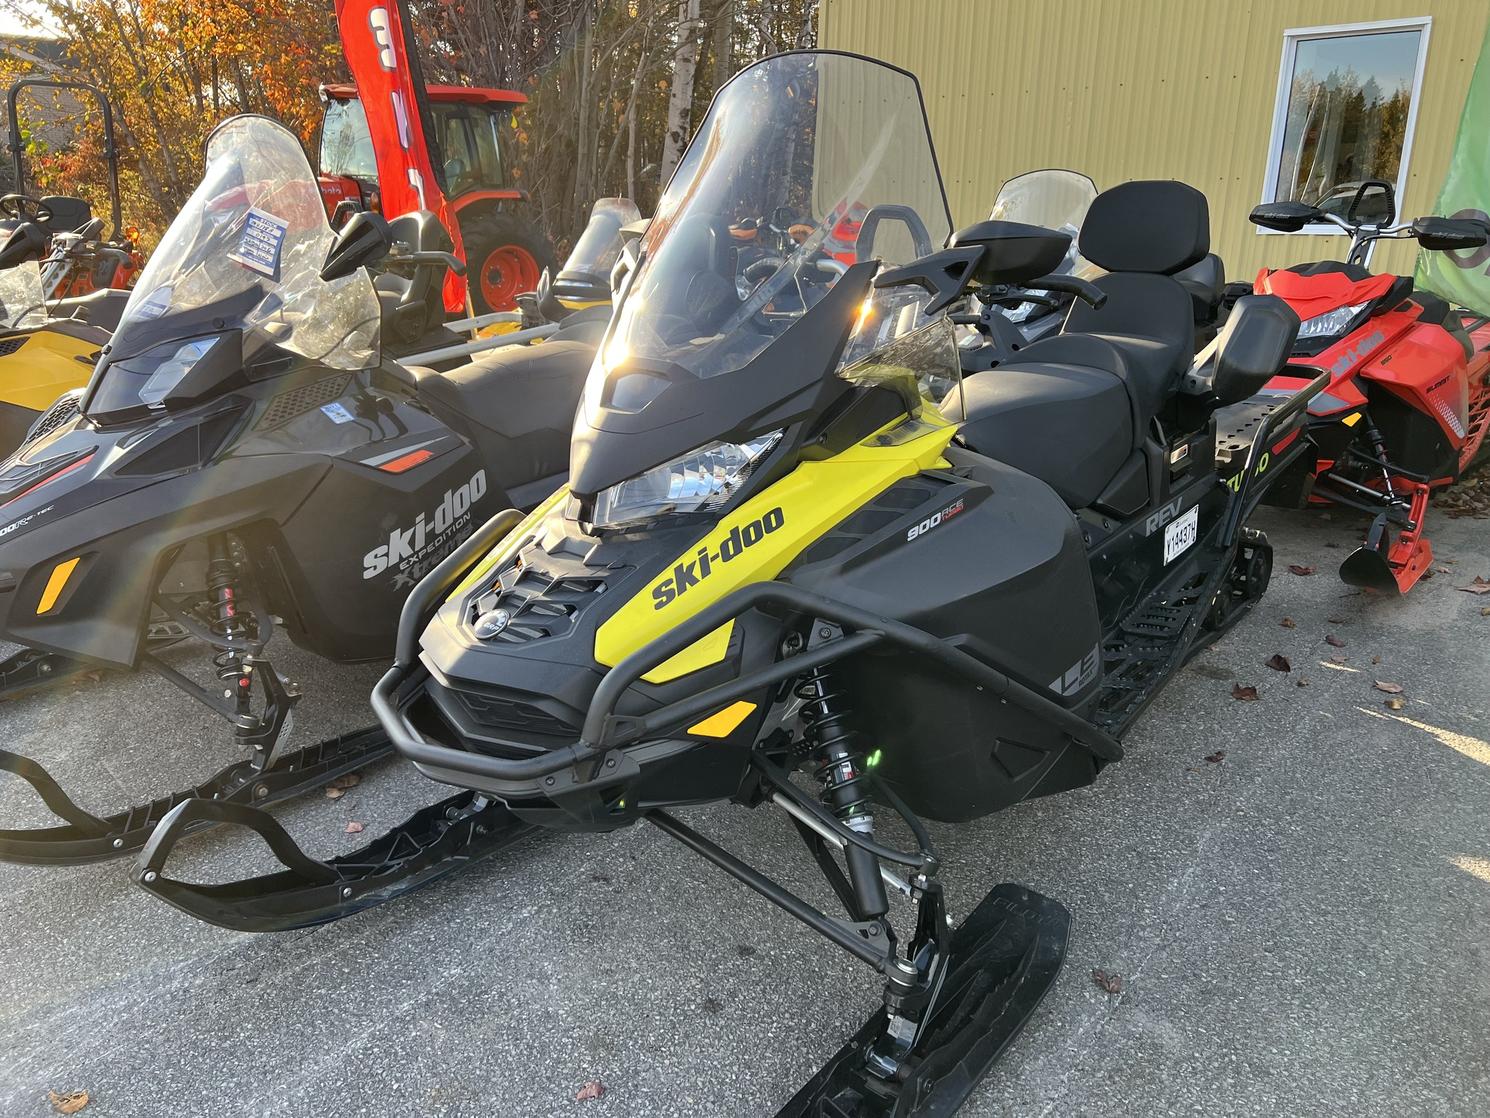 Ski-Doo Expedition 20 pouces 2020 - 900 ace turbo